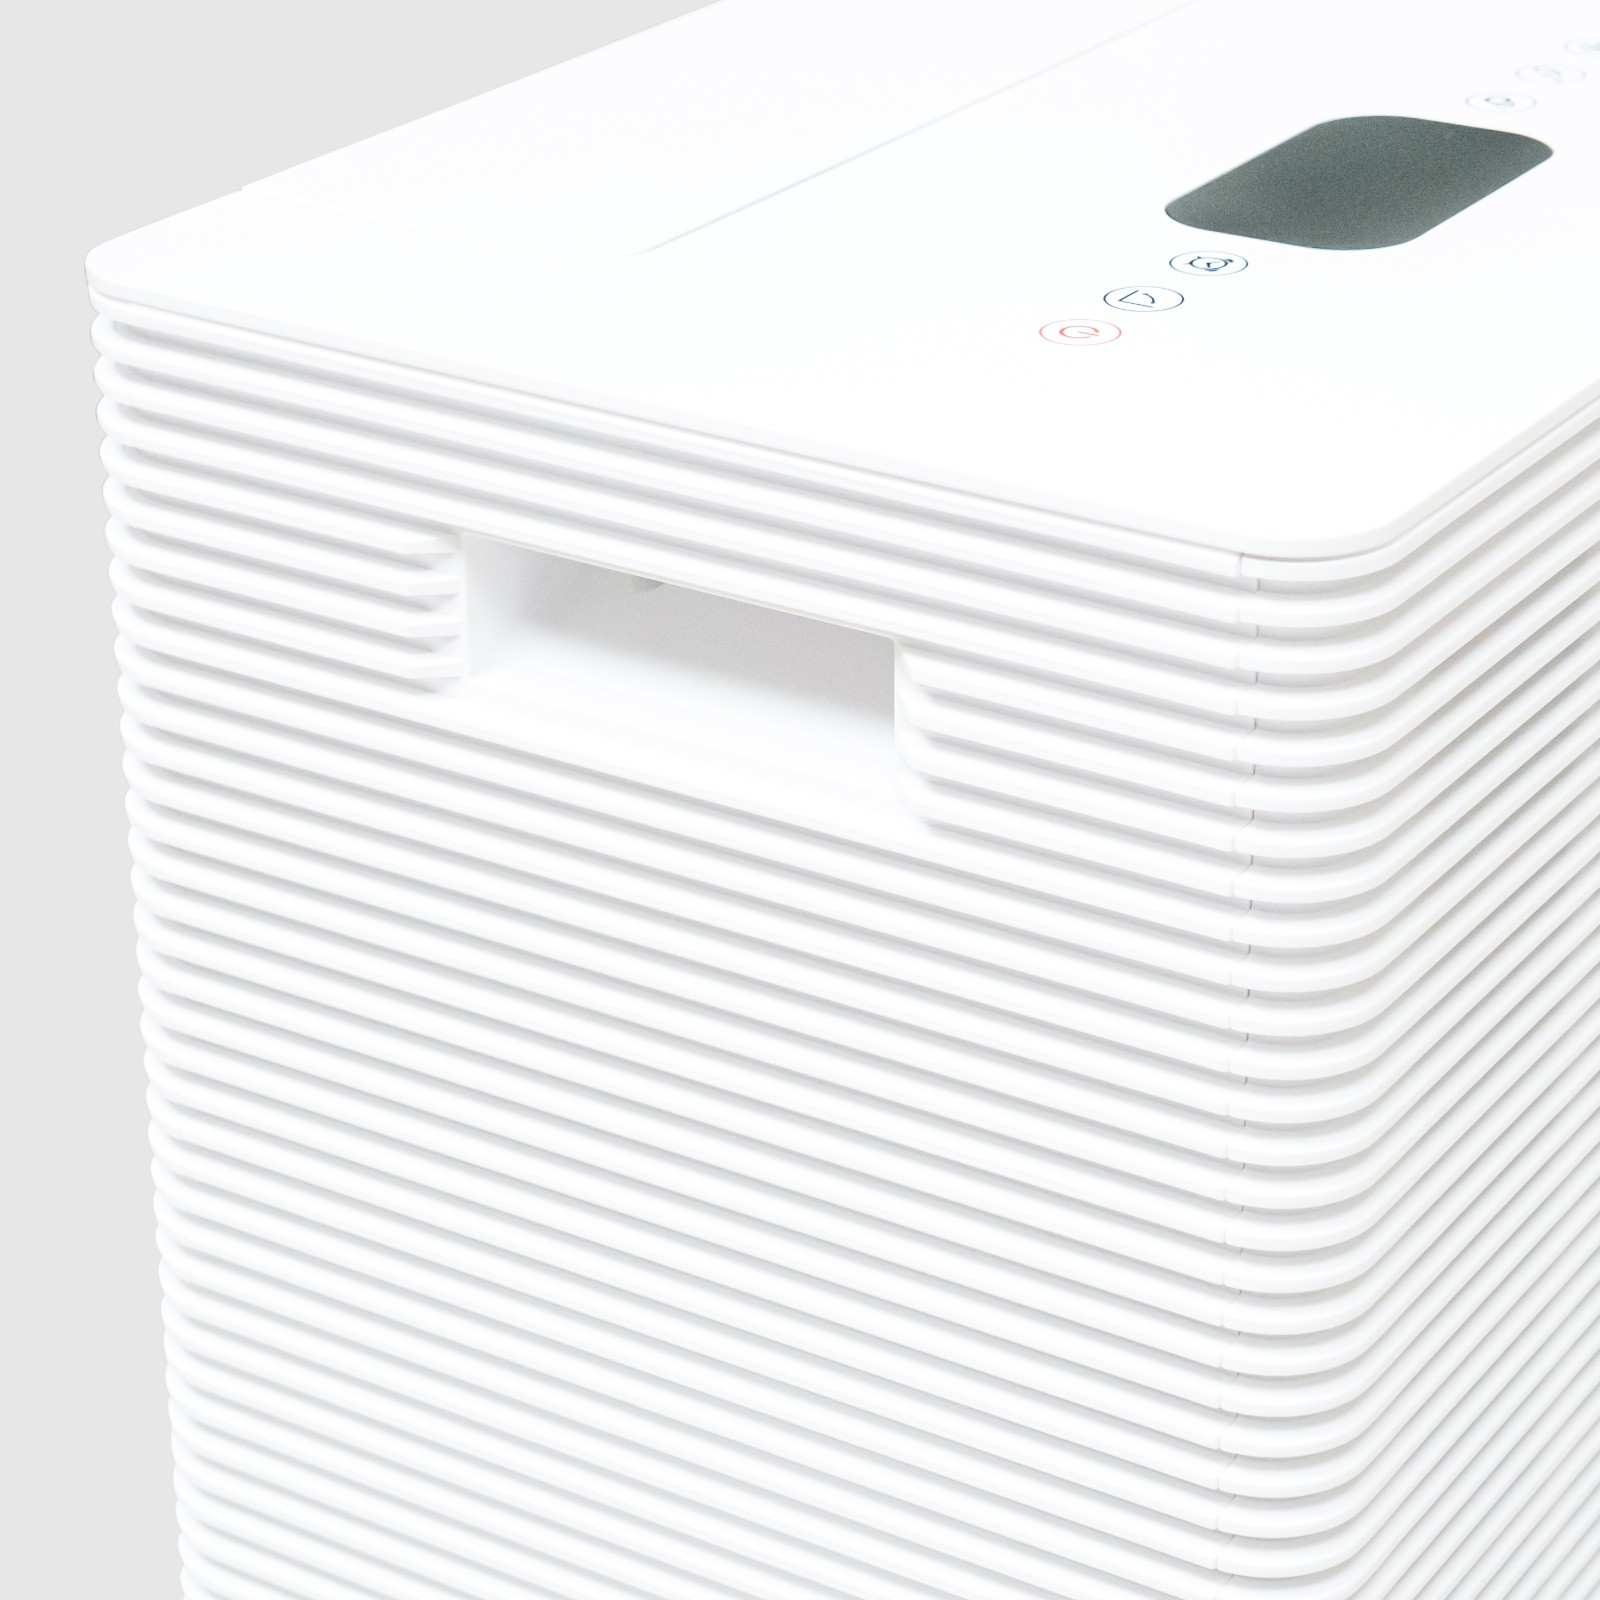 Close-up view of the top section of the White Westinghouse Dehumidifier AWHD40, highlighting the built-in handle, digital control panel, and air vents. The sleek white design is suitable for maintaining optimal humidity levels in residential and commercial spaces.